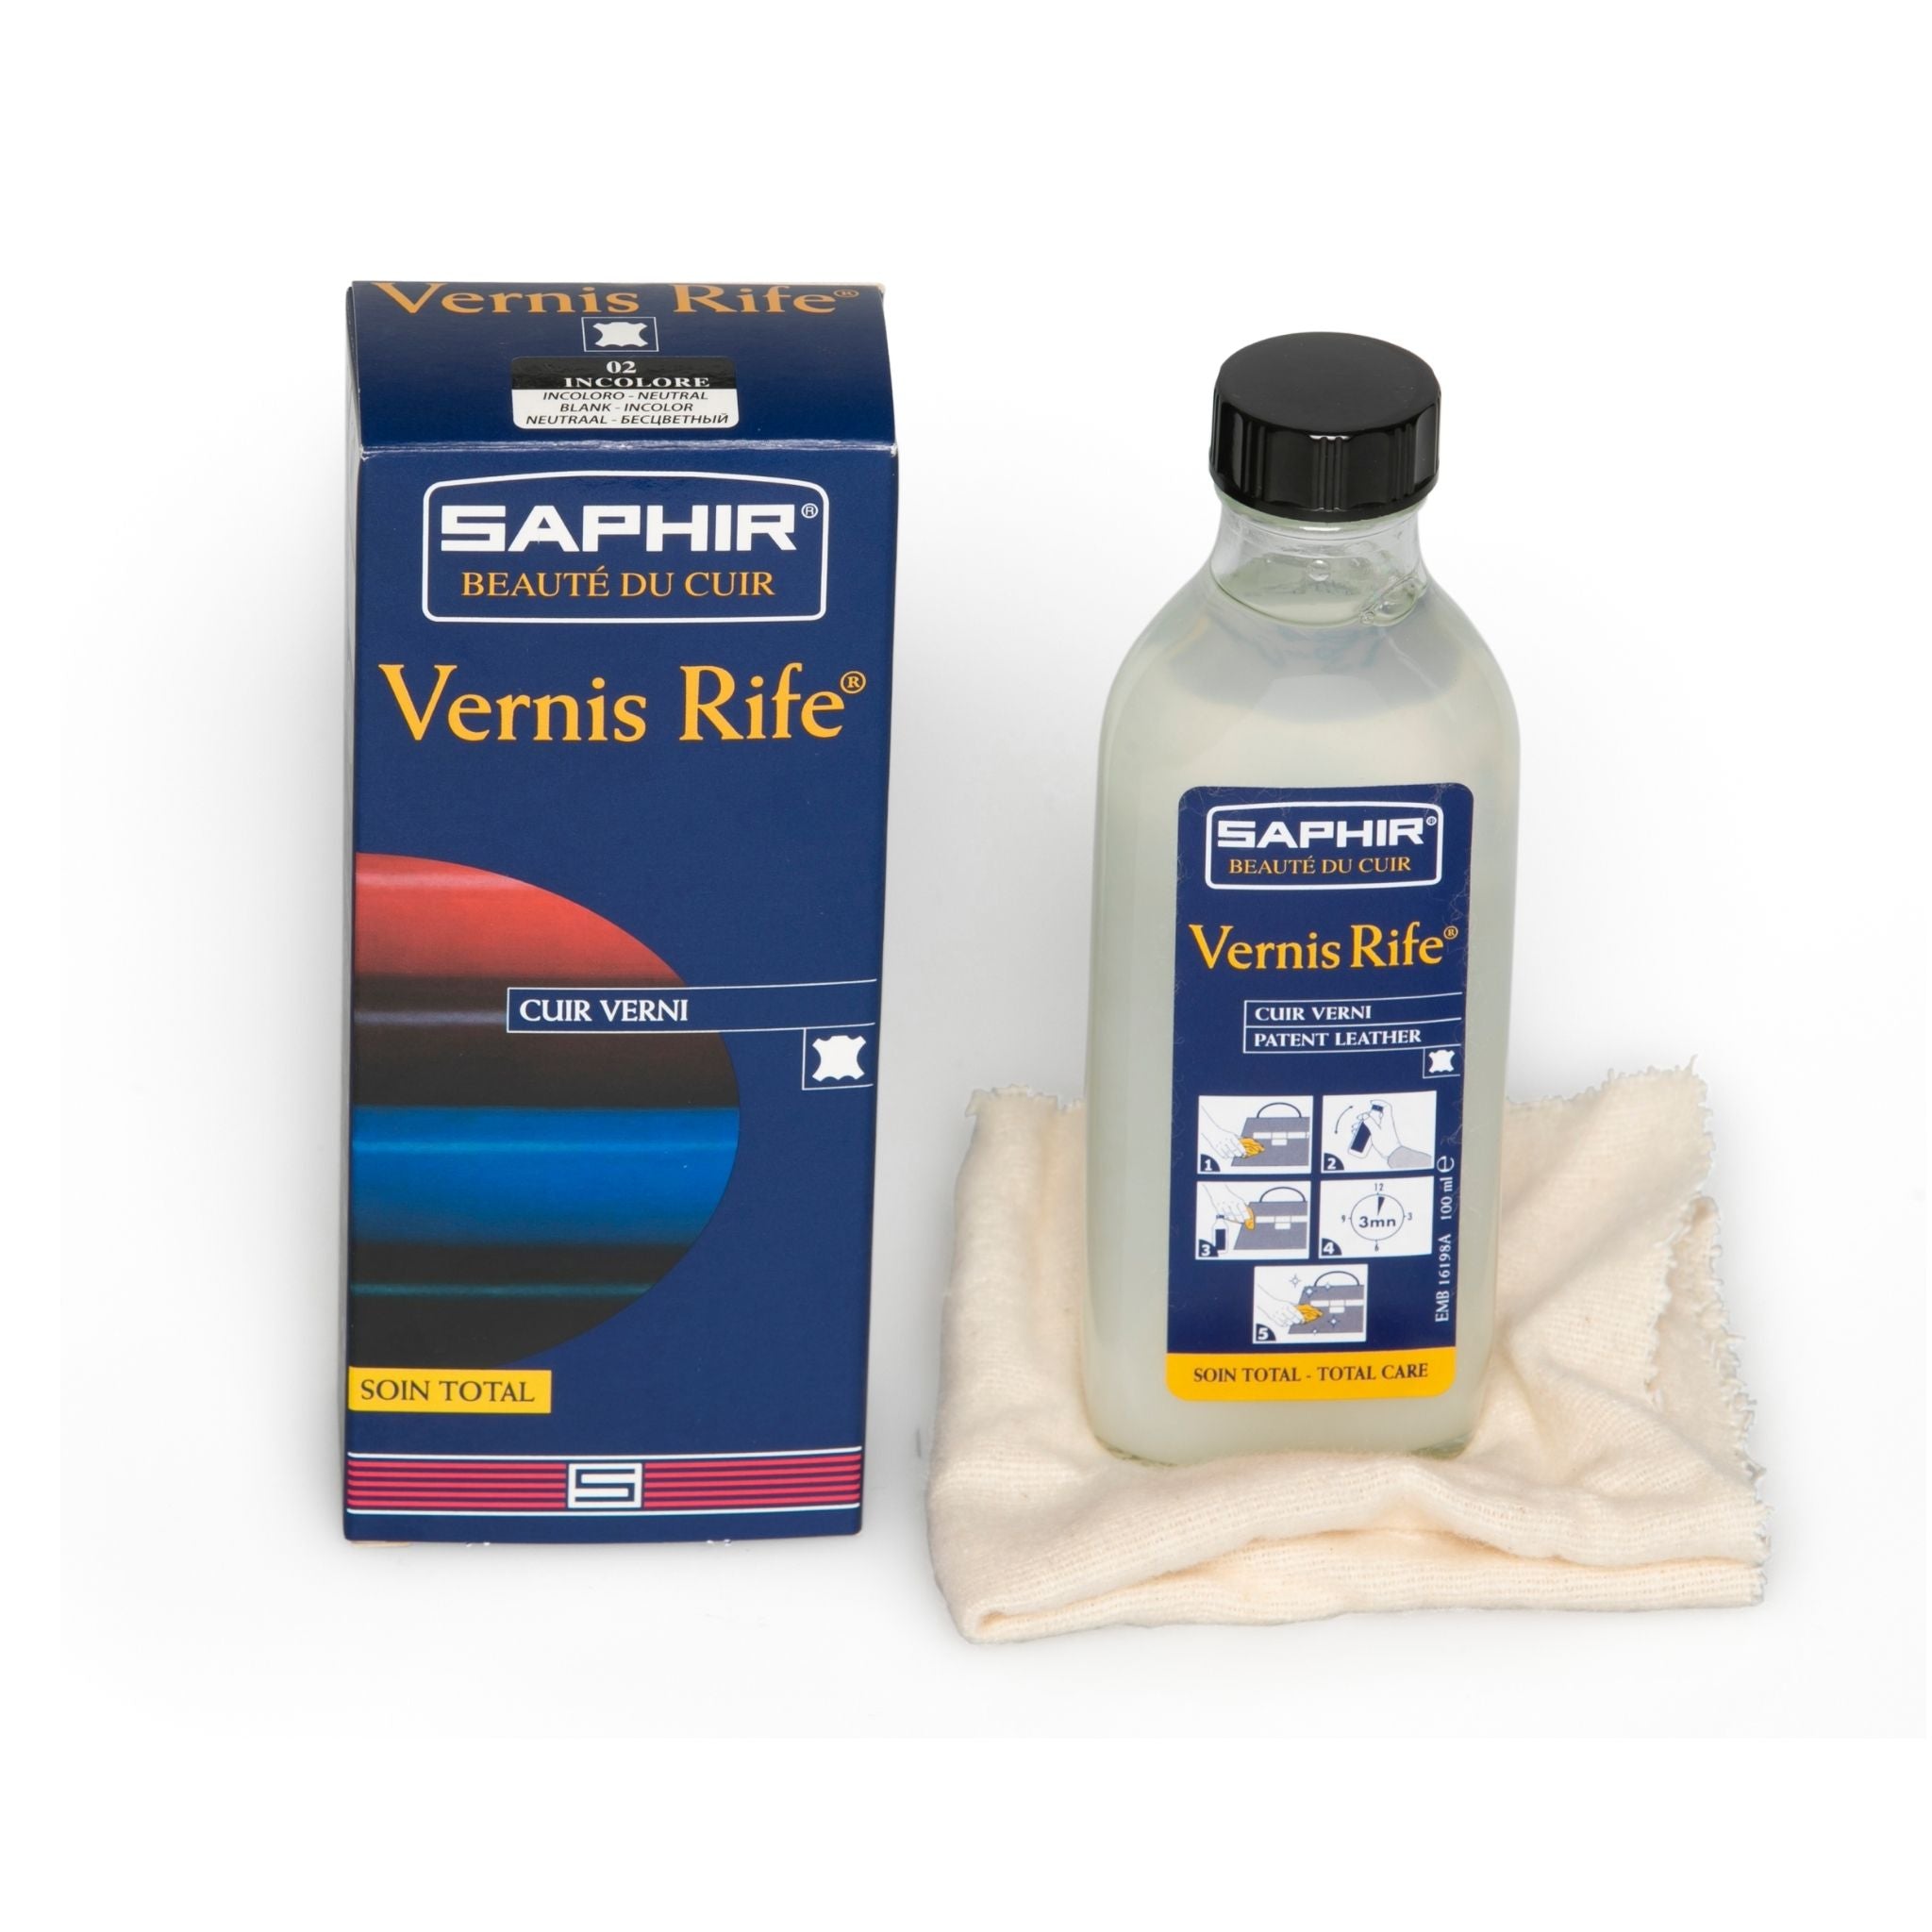 Saphir Vernis Rife for cleaning dirt off patent leather surface. Stocked in Australia.